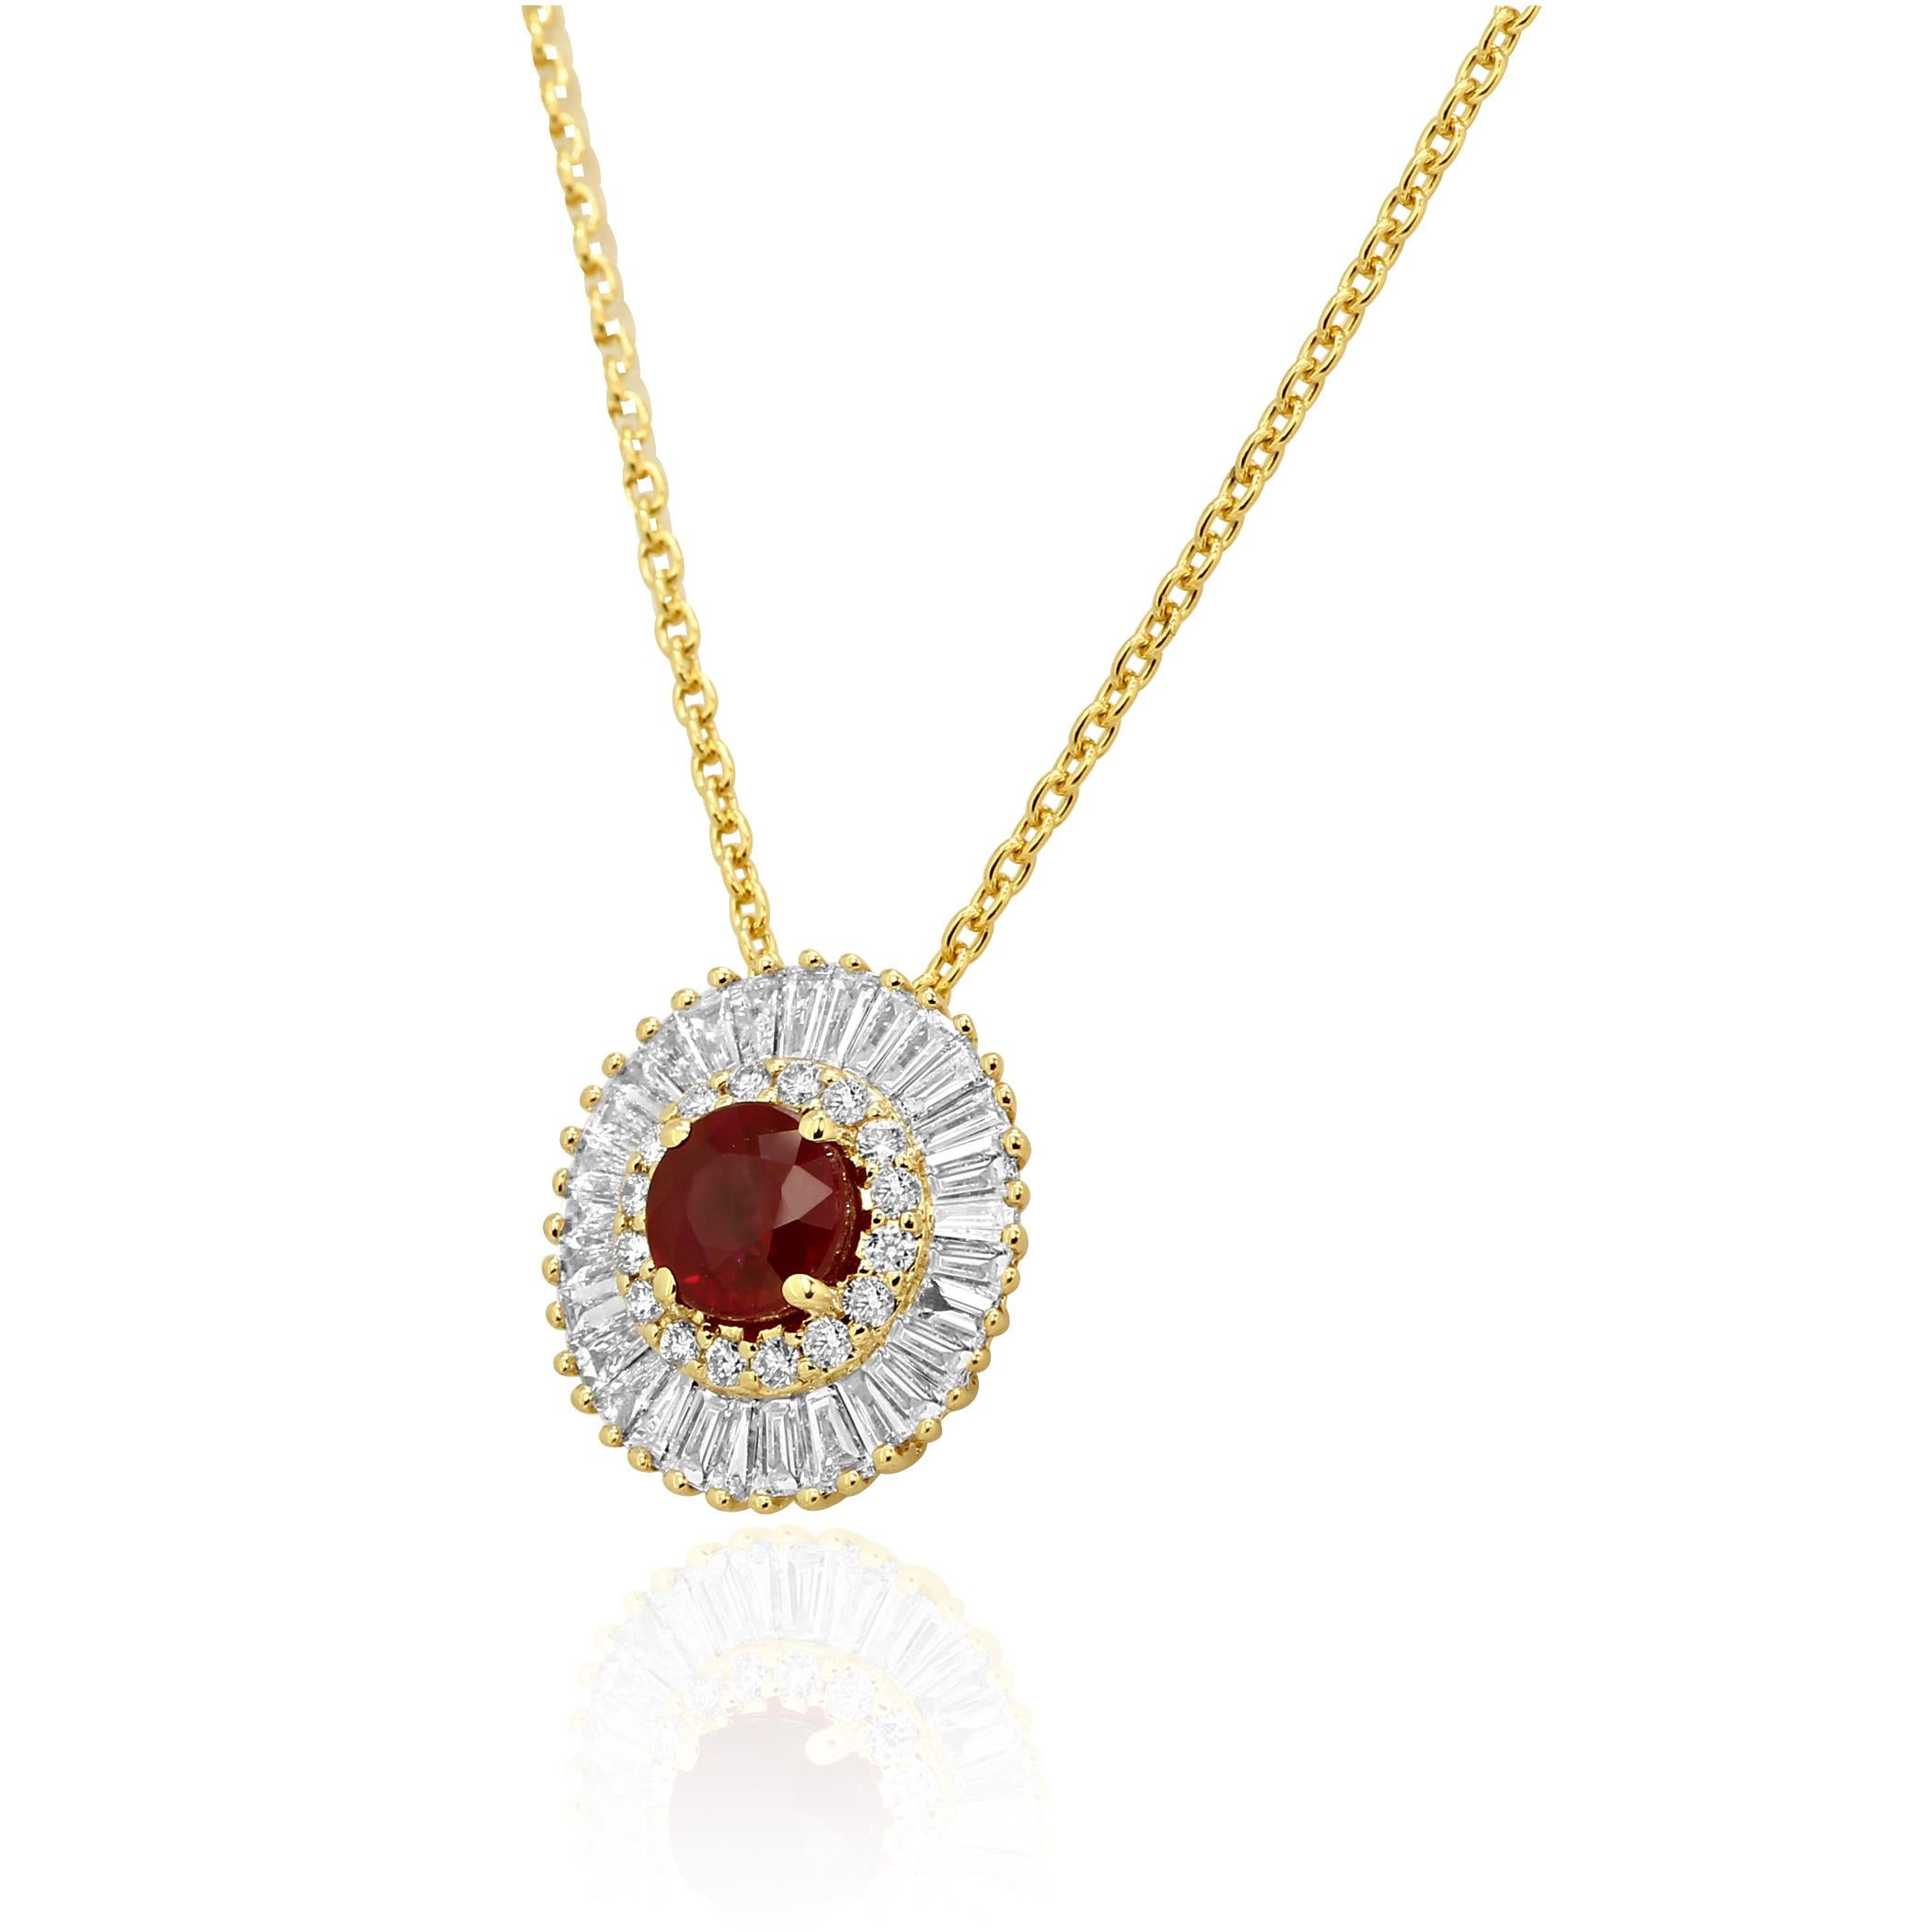 Gorgeous Ruby Round 0.53 Carat encircled in a Double Halo of White Round Diamonds 0.11 Carat and White Baguette Diamond 0.46 Carat in 14K Yellow Gold Stunning Ballerina Style Pendant Necklace.

Style available in different price ranges. Prices are